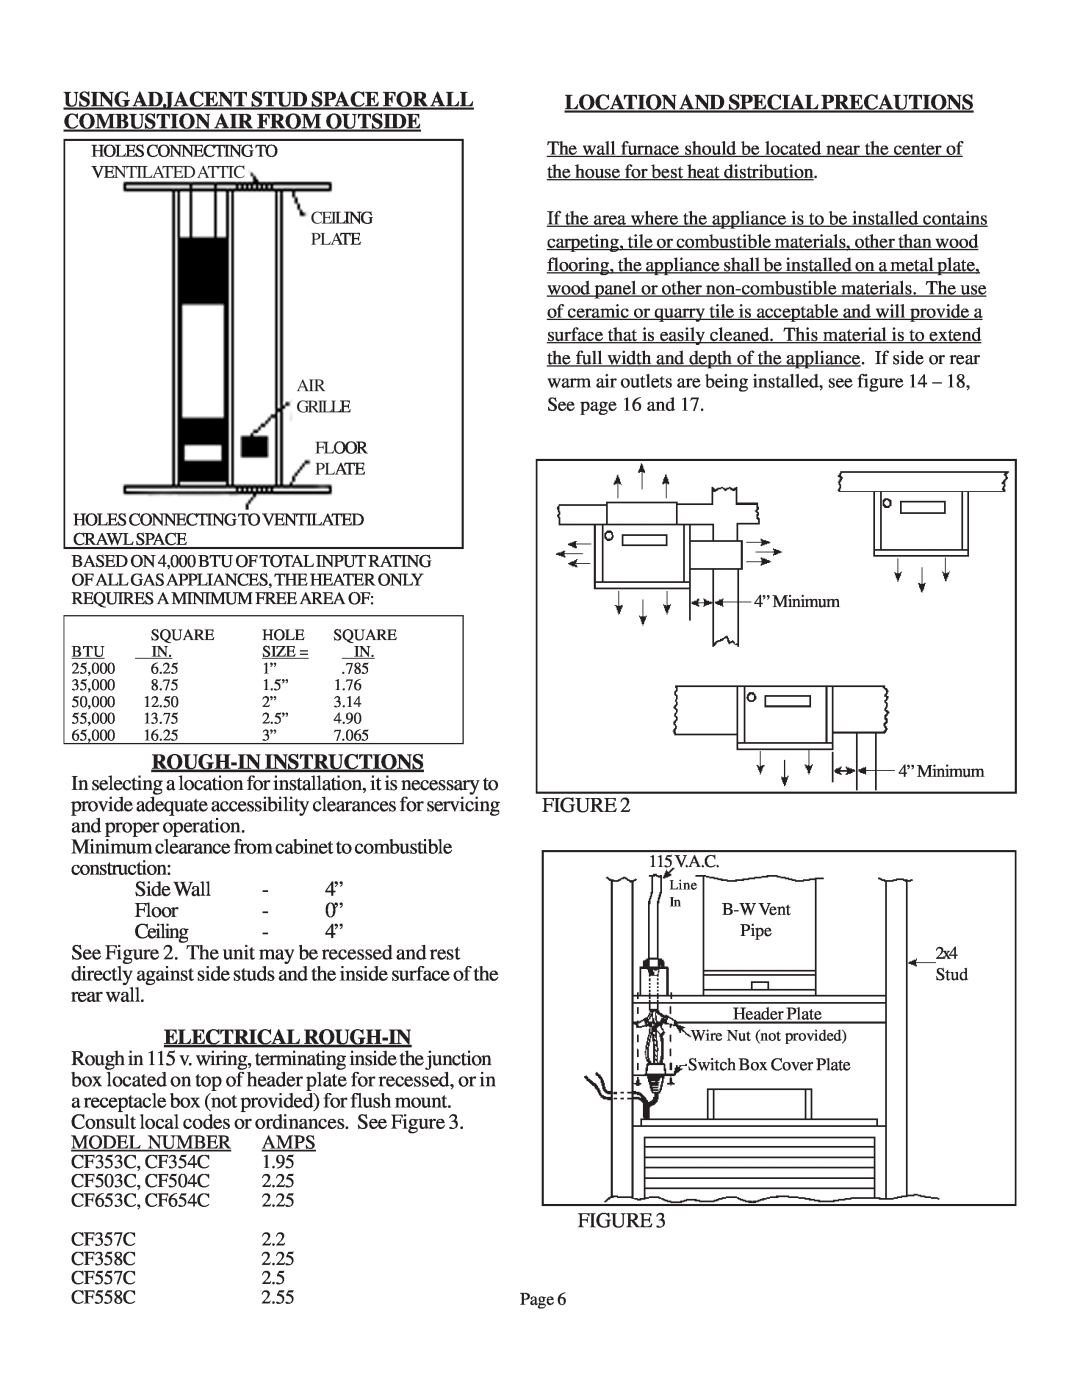 Louisville Tin and Stove 78111 warranty Rough-Ininstructions, Electrical Rough-In, Location And Special Precautions 